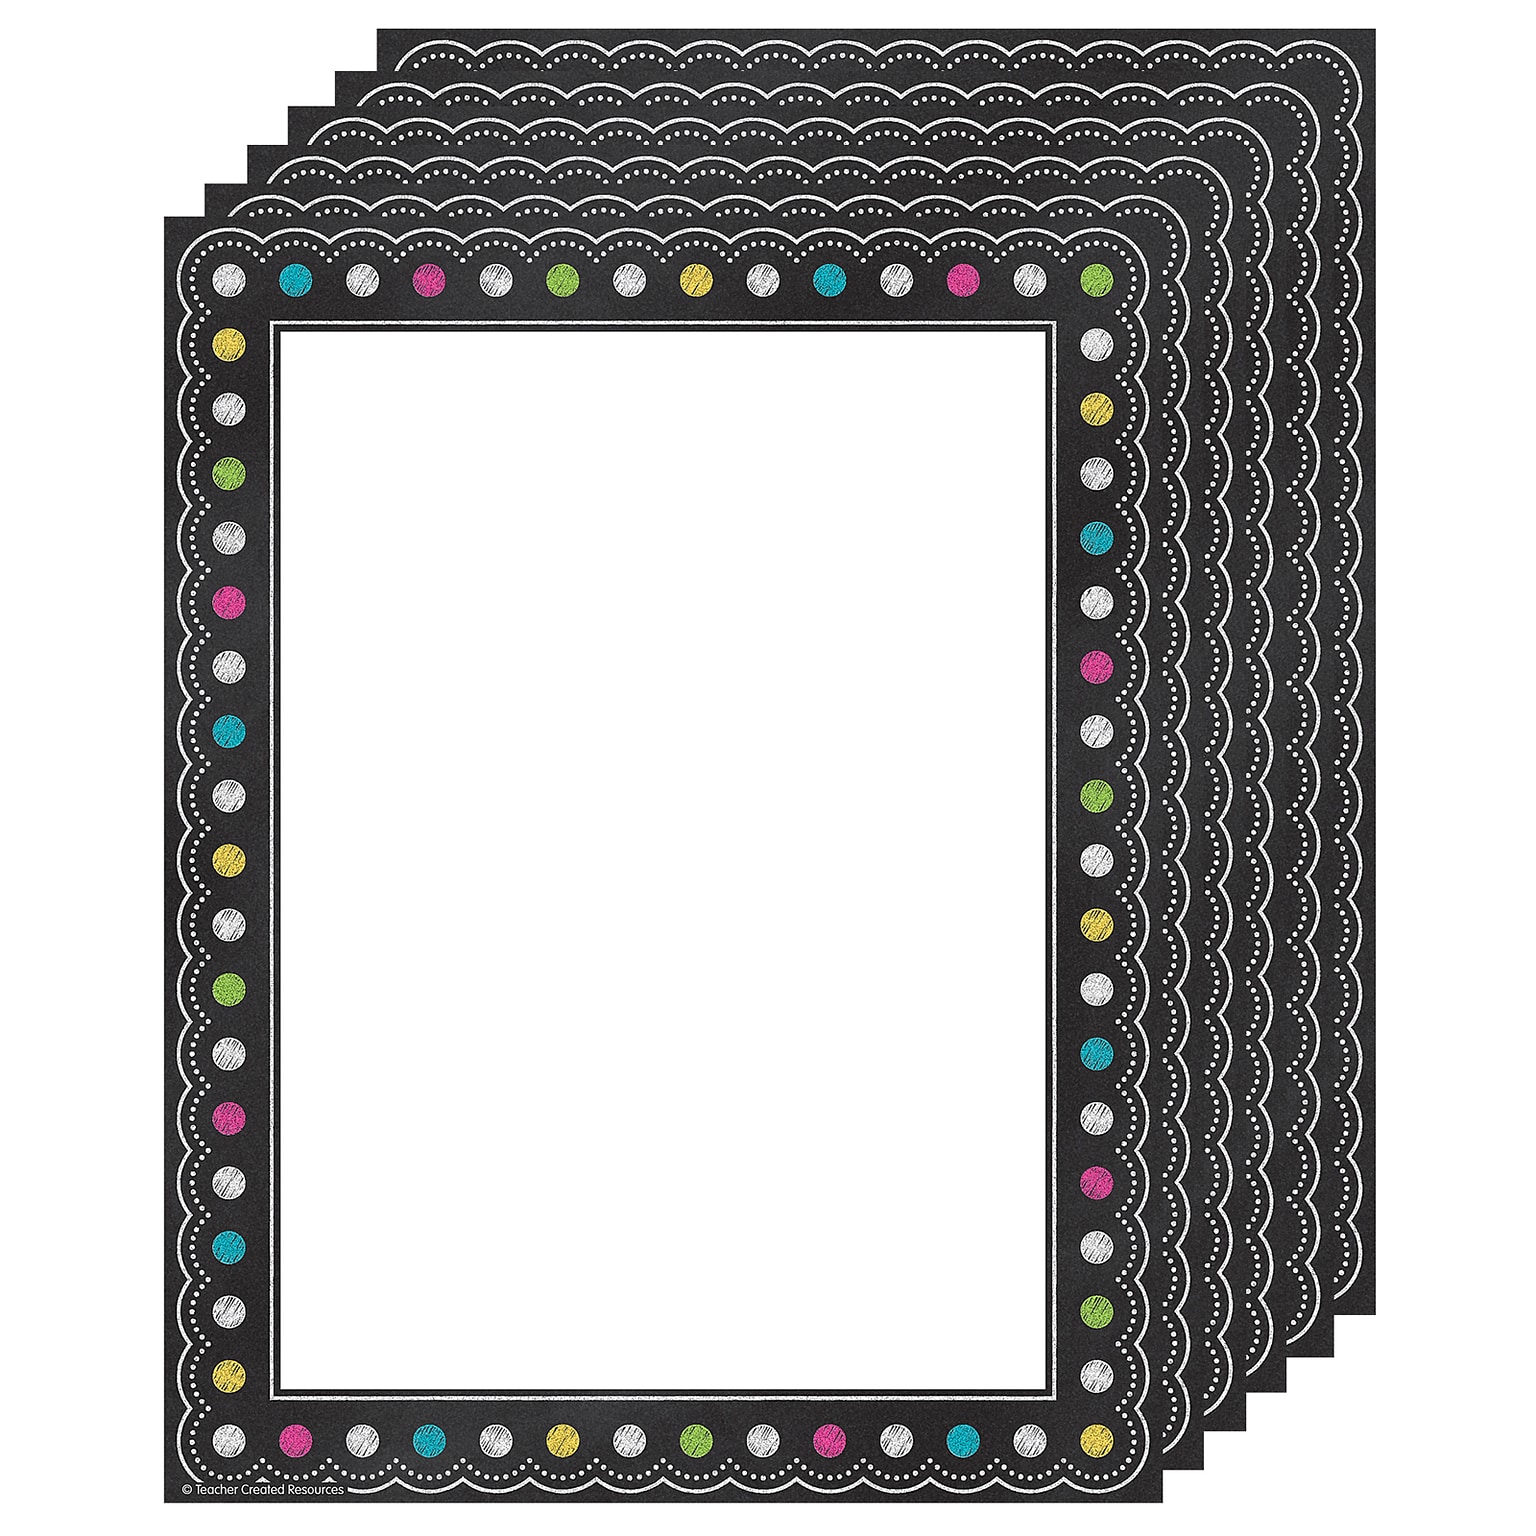 Teacher Created Resources Chalkboard Brights Computer Paper, 50 Per Pack, 6 Packs (TCR5837-6)